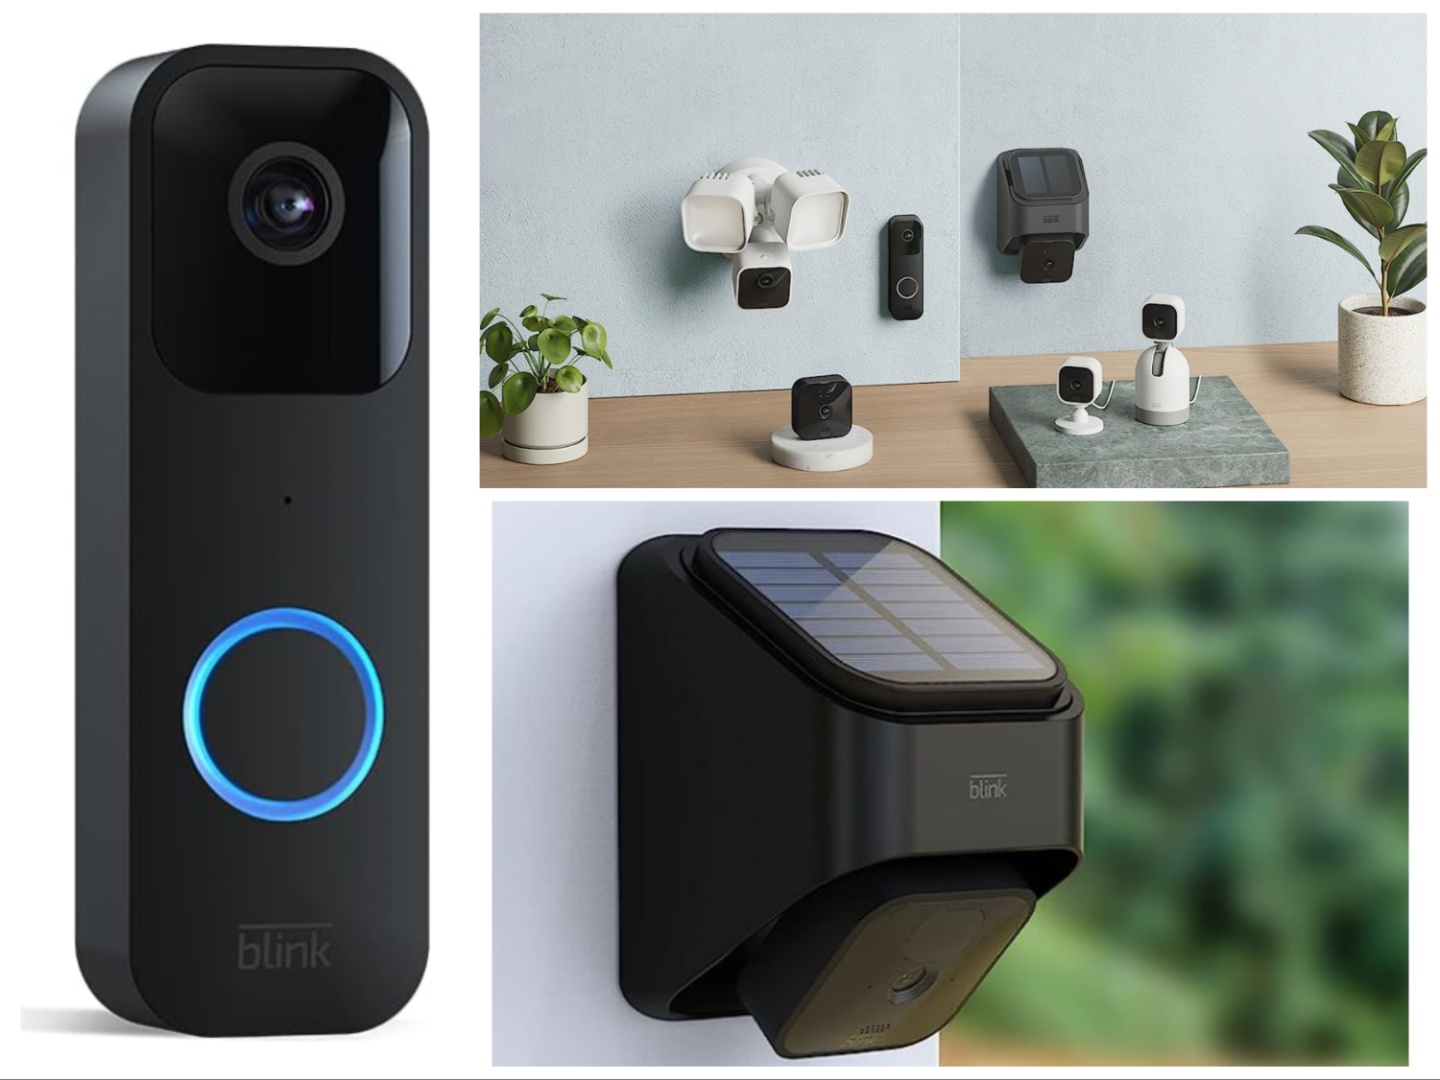 has early Prime Day deals on Blink video doorbell for just $29 and  camera systems under $100 